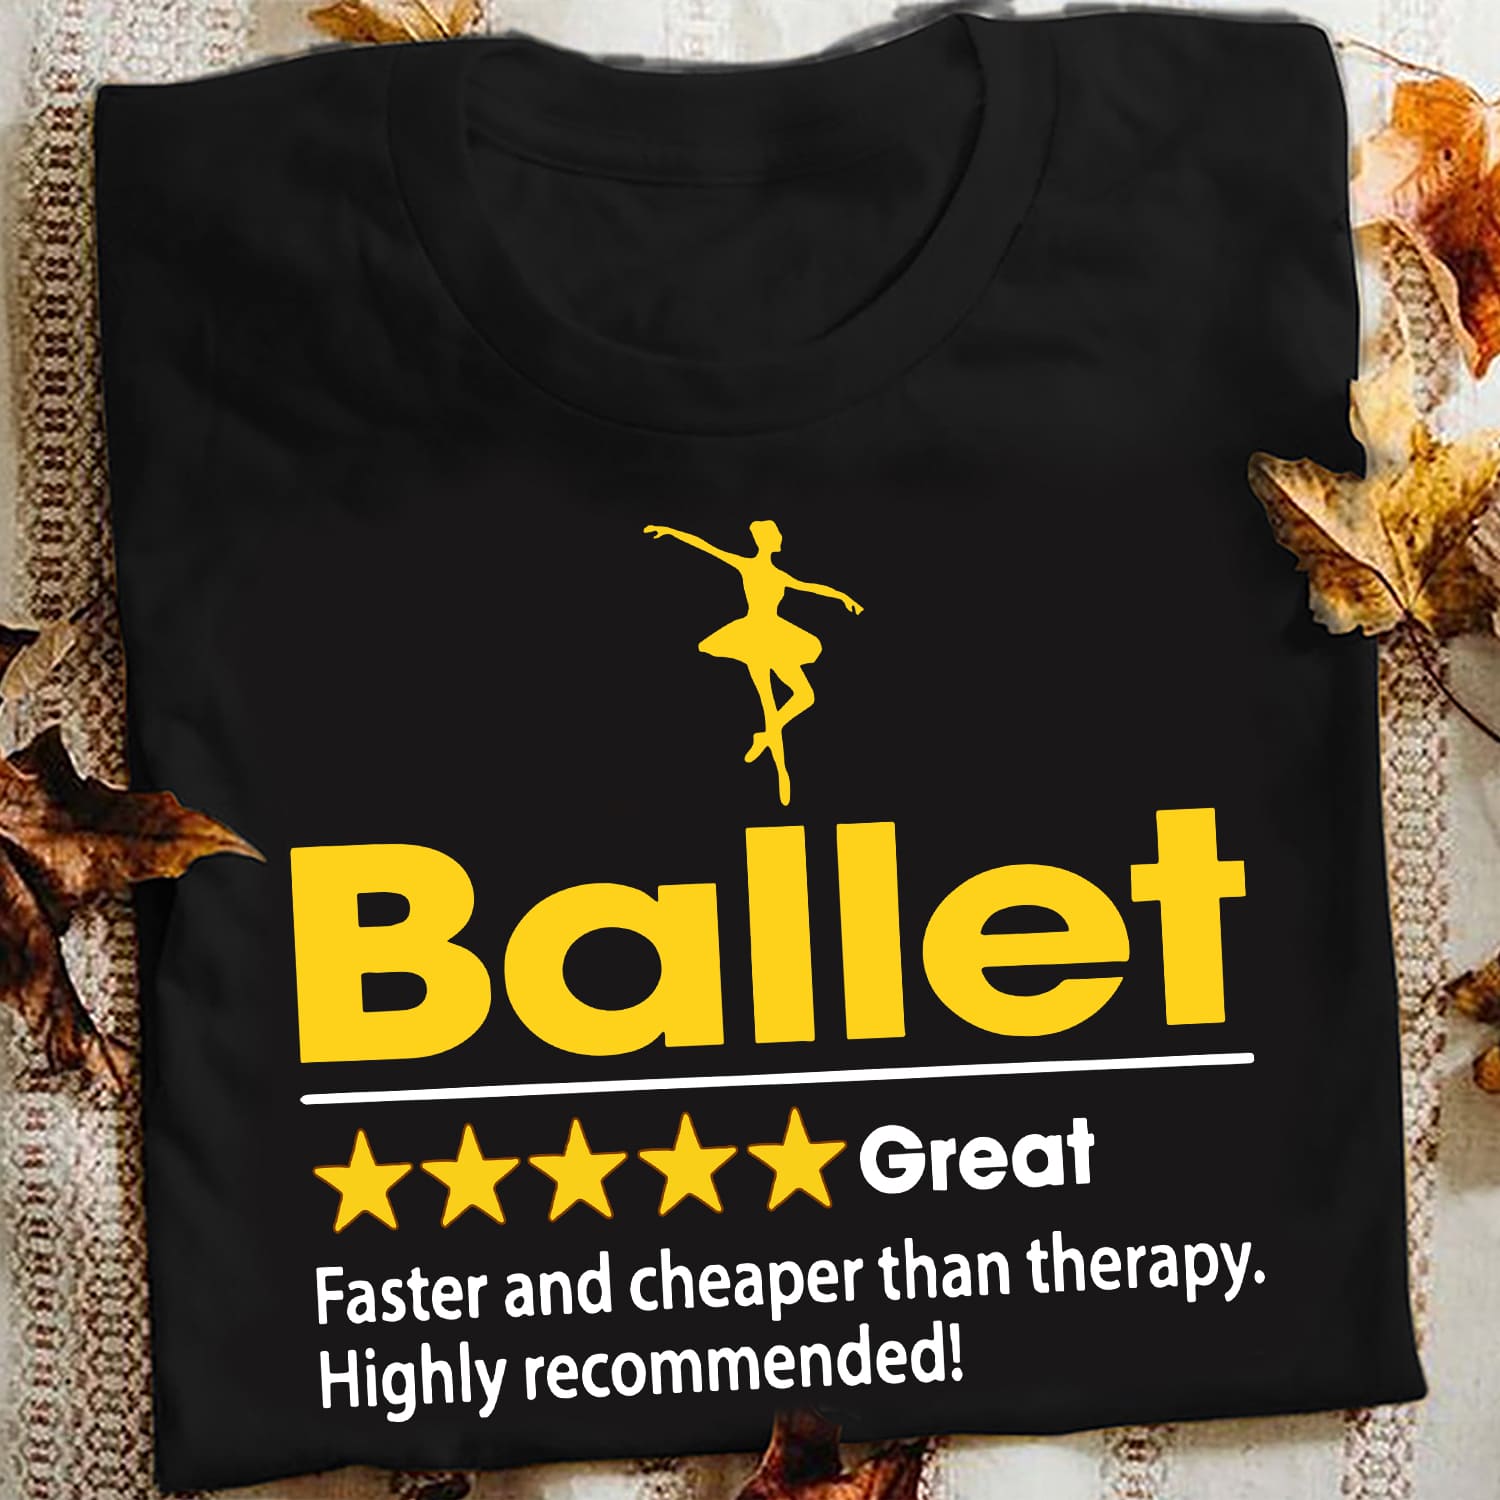 Ballet Dacing - Ballet great faster and cheaper than therapy highly recommended!